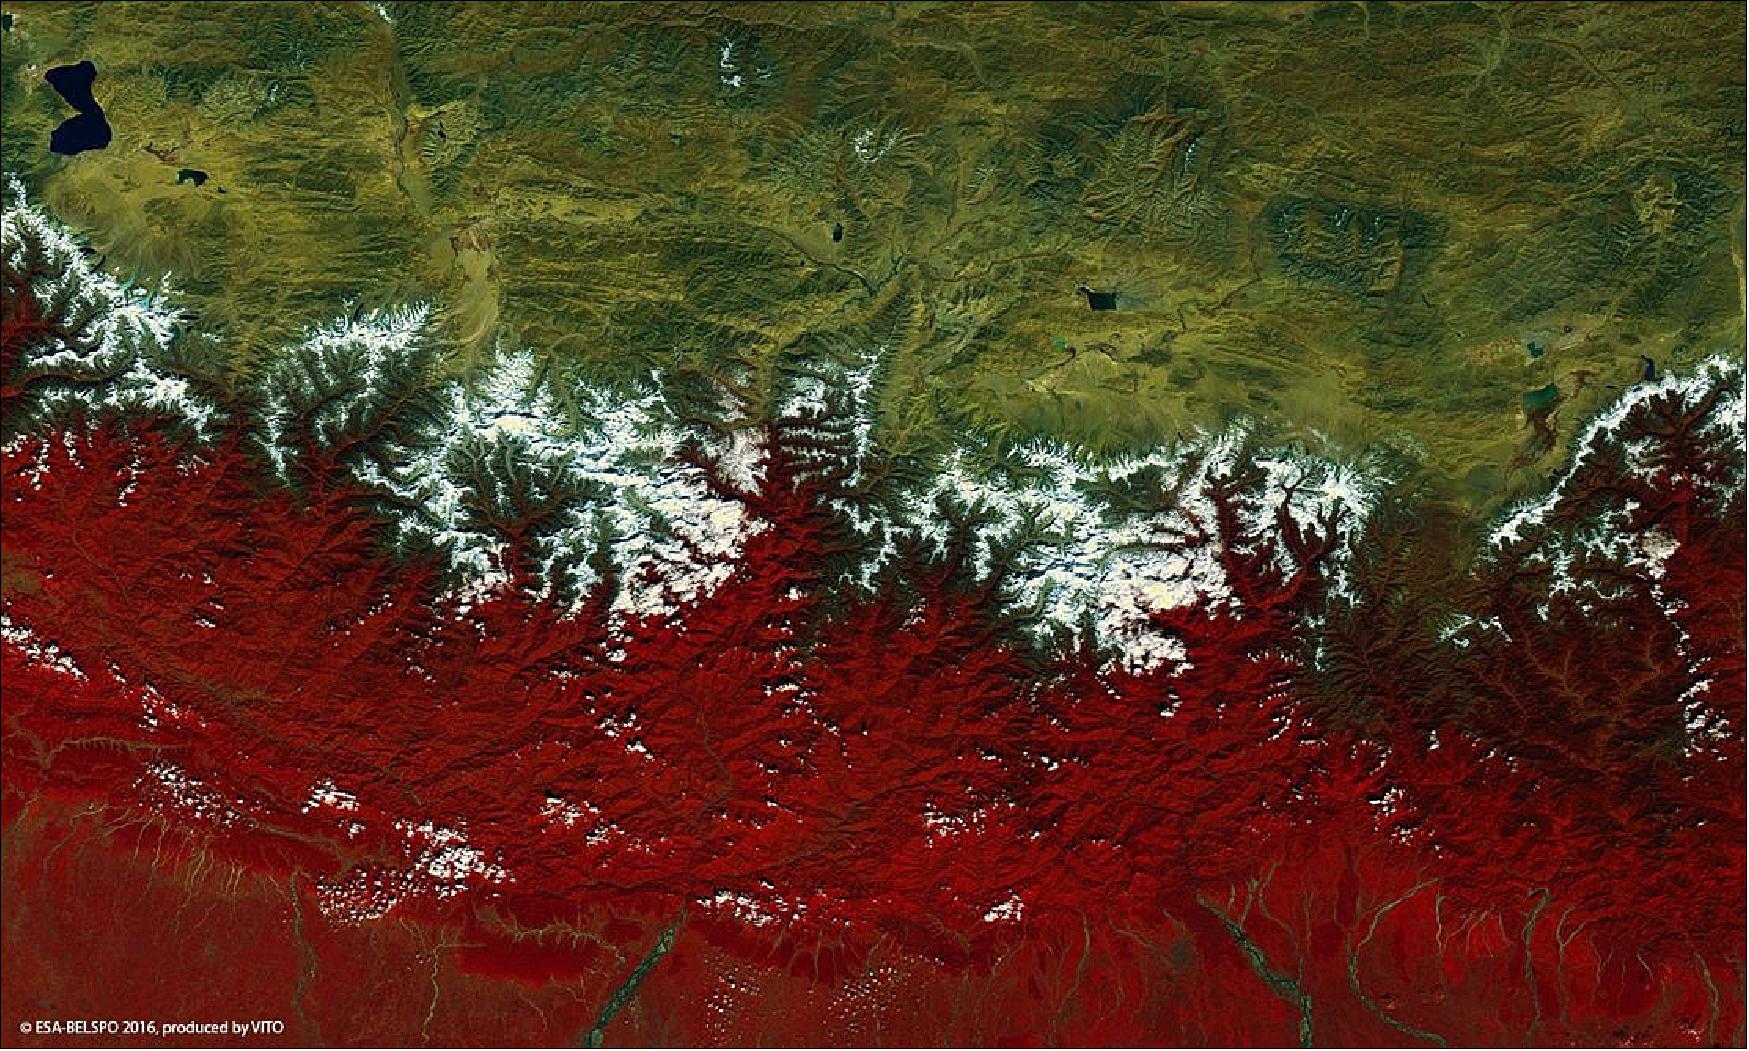 Figure 42: PROBA-V – ESA's smallest Earth-observing mission – overflies Mount Everest, the highest mountain in the world, its peak seen left of center in this false-color image. This 100 m-resolution image was acquired by PROBA-V on 27 October 2016 (image credit: ESA/BELSPO – produced by VITO)